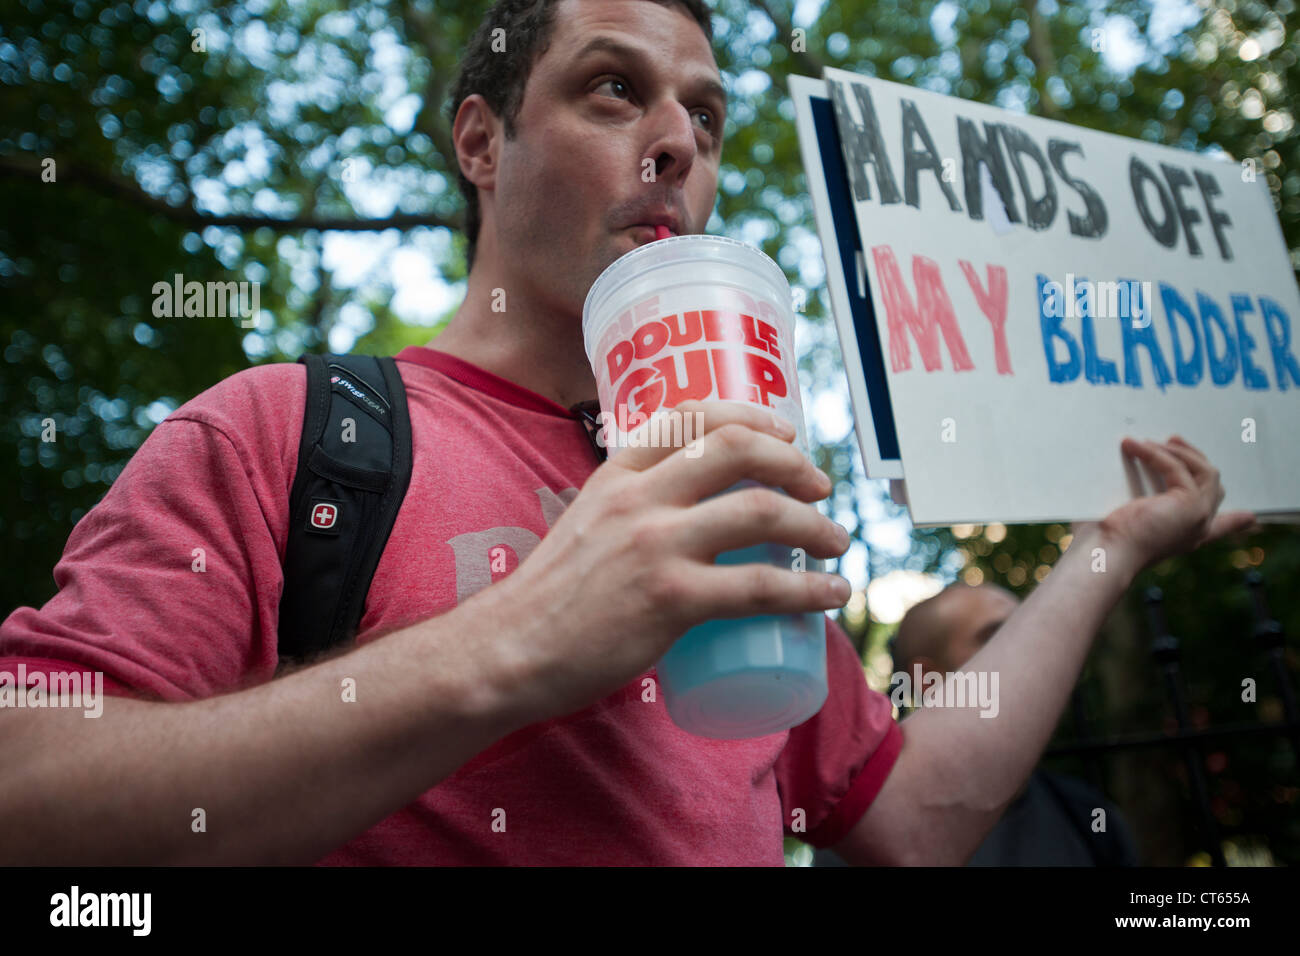 Demonstration against New York Mayor Michael Bloomberg's plan to regulate the size of soft drinks sold in the city. Stock Photo